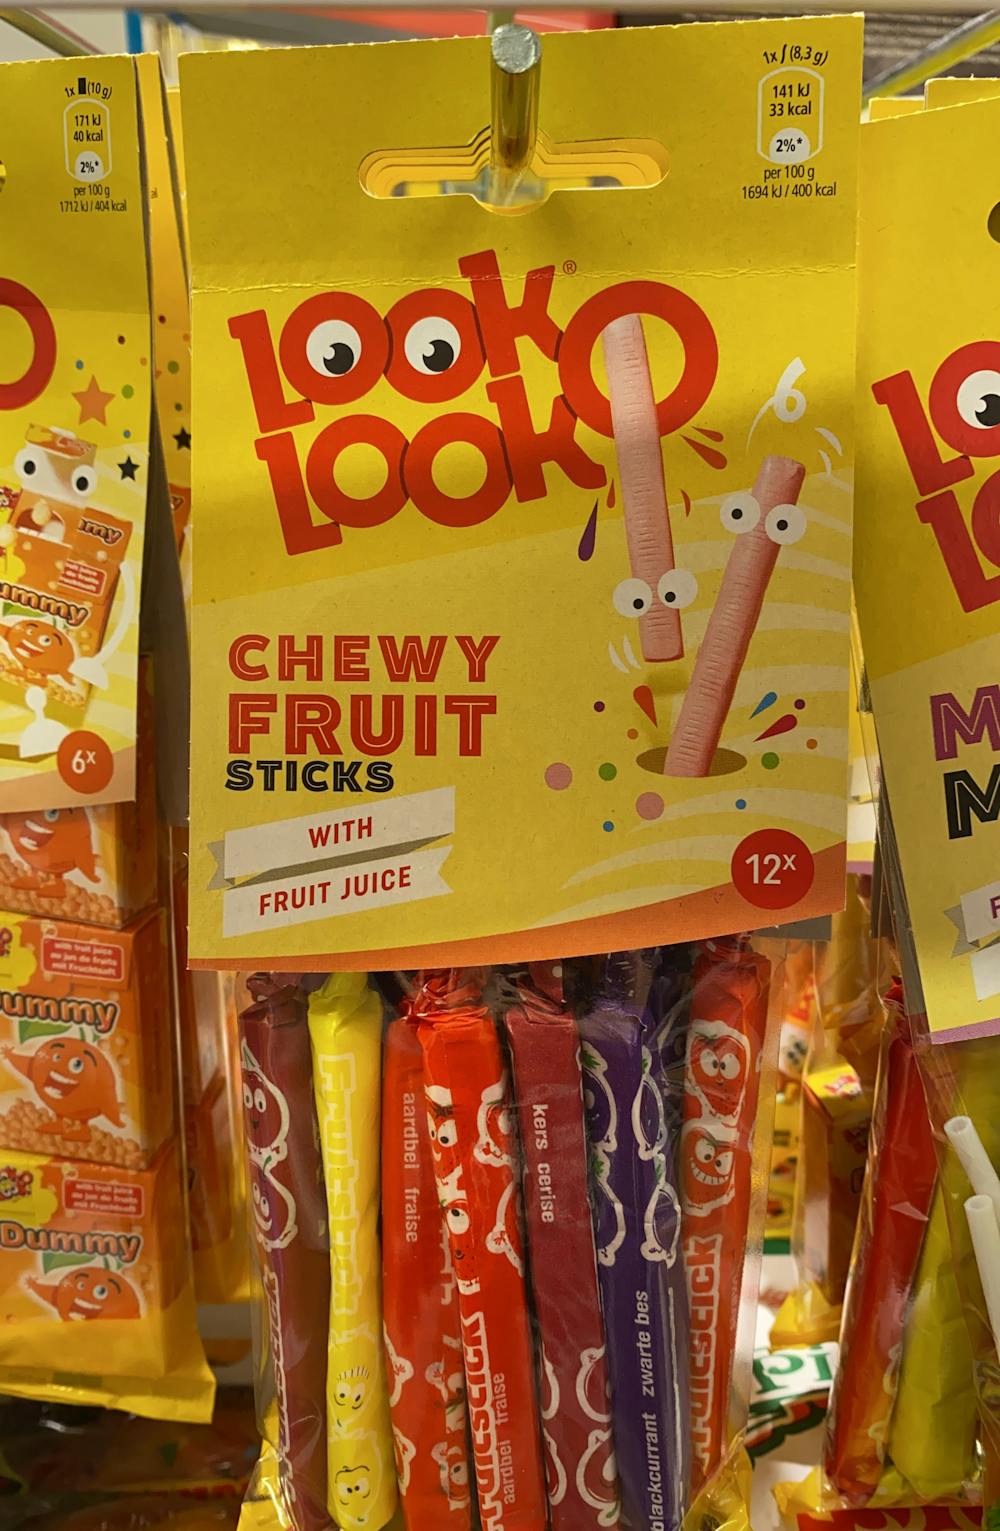 Chewy fruit sticks, Look o look